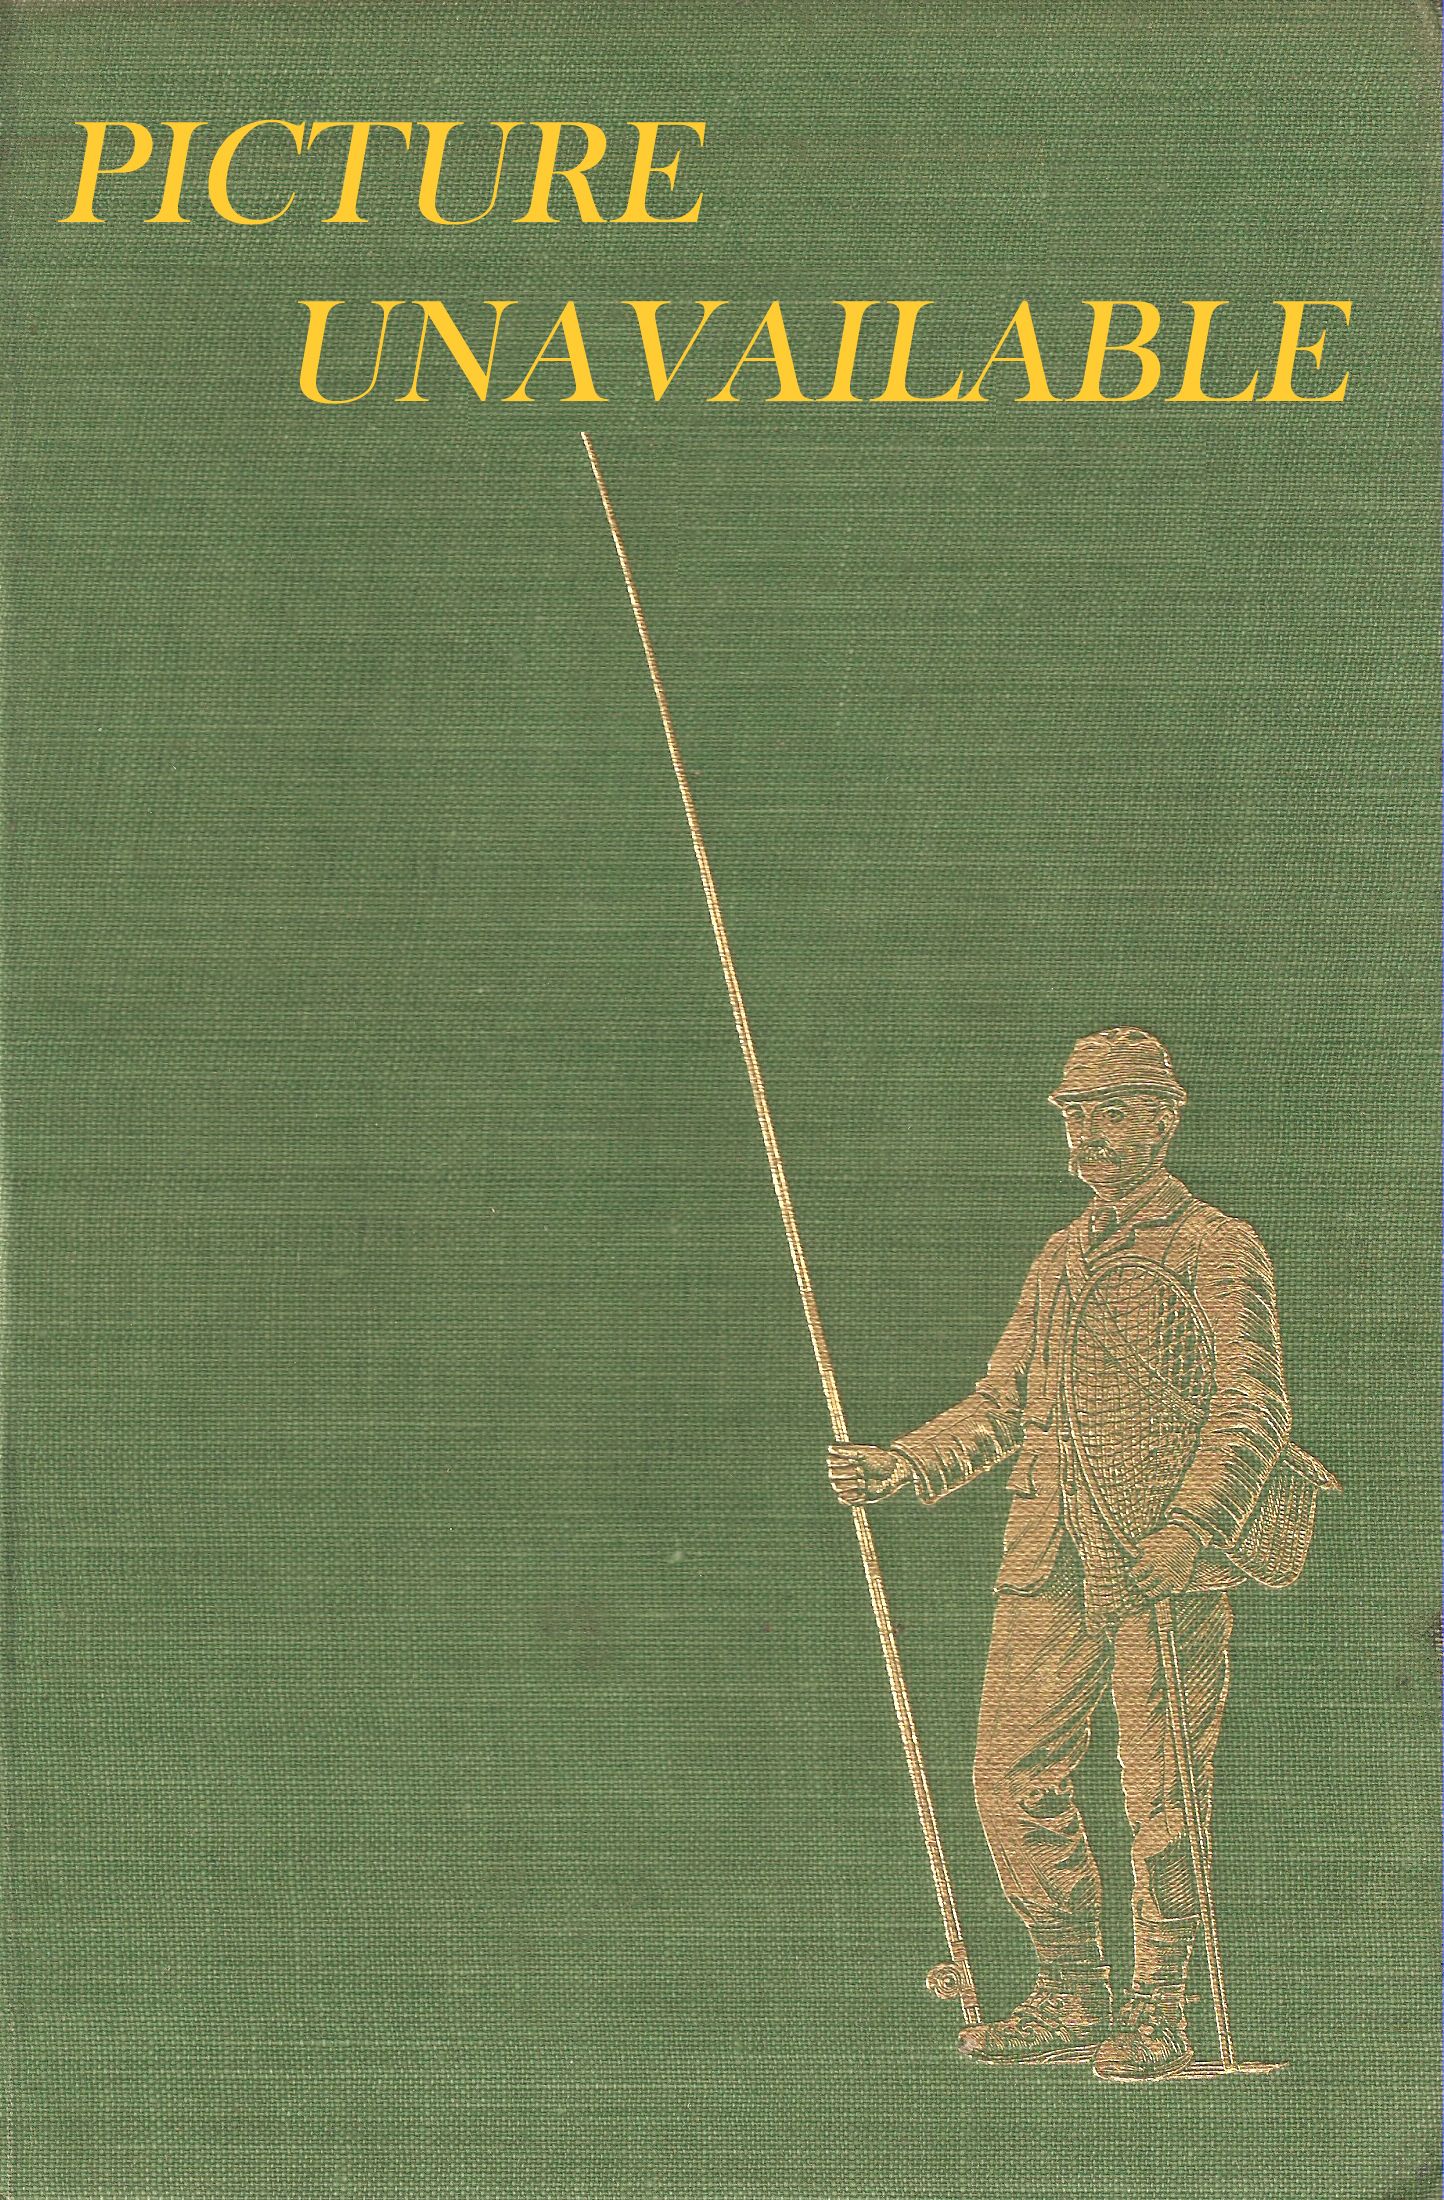 ONE RIVER: OR TROUT AND GRAYLING FISHING ON THE UPPER (SALISBURY) AVON. By  Brigadier General H.E. Carey, C.M.G., D.S.O.